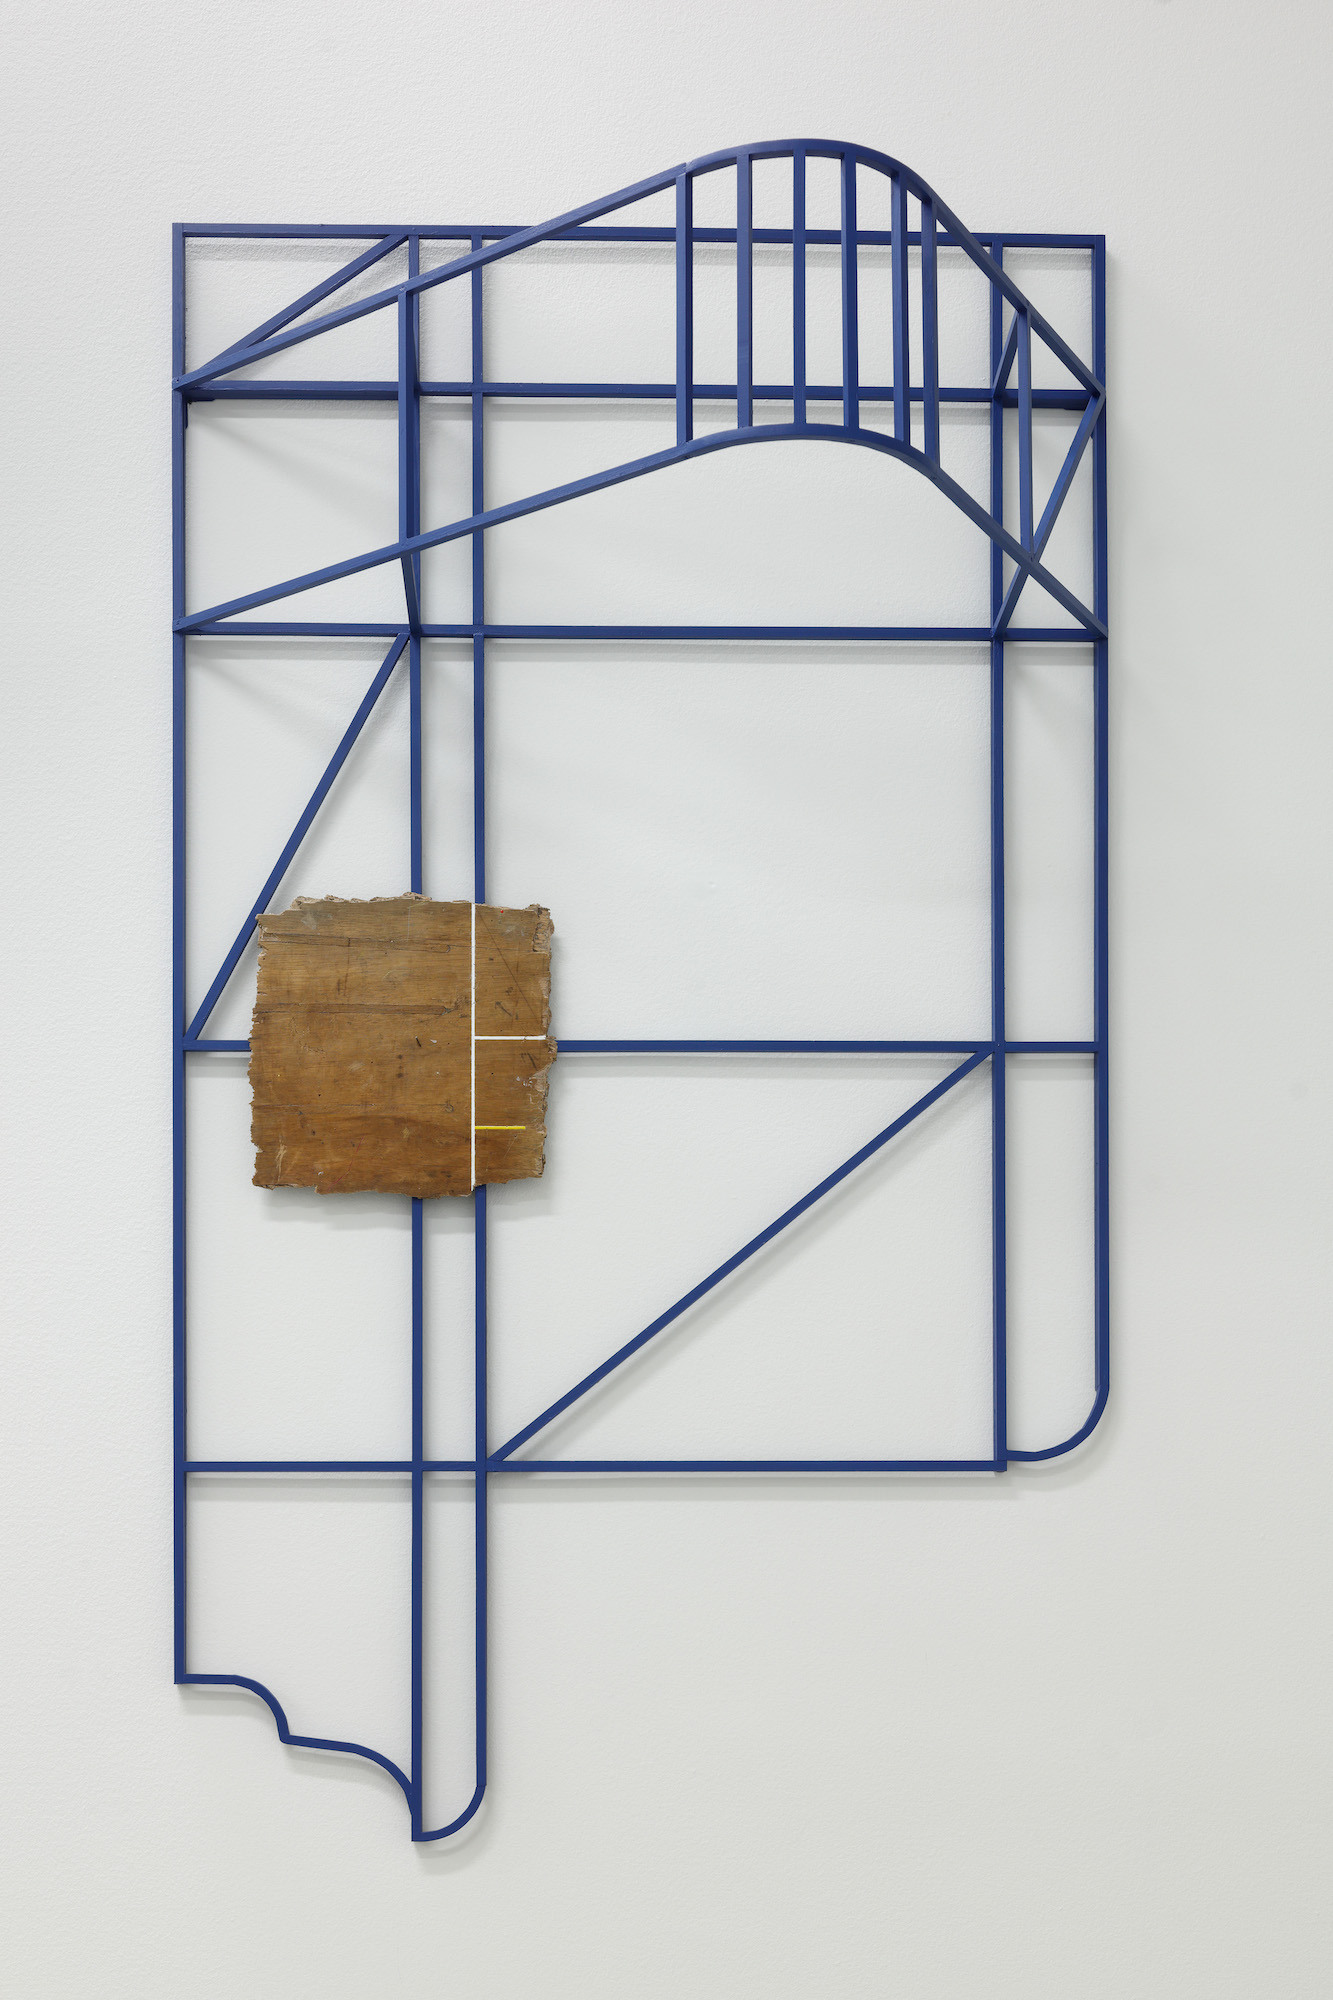 Filip Dvořák, From the Back wall, From when He was Planning, 2023, mixed media, 90 x 155 x 47 cm